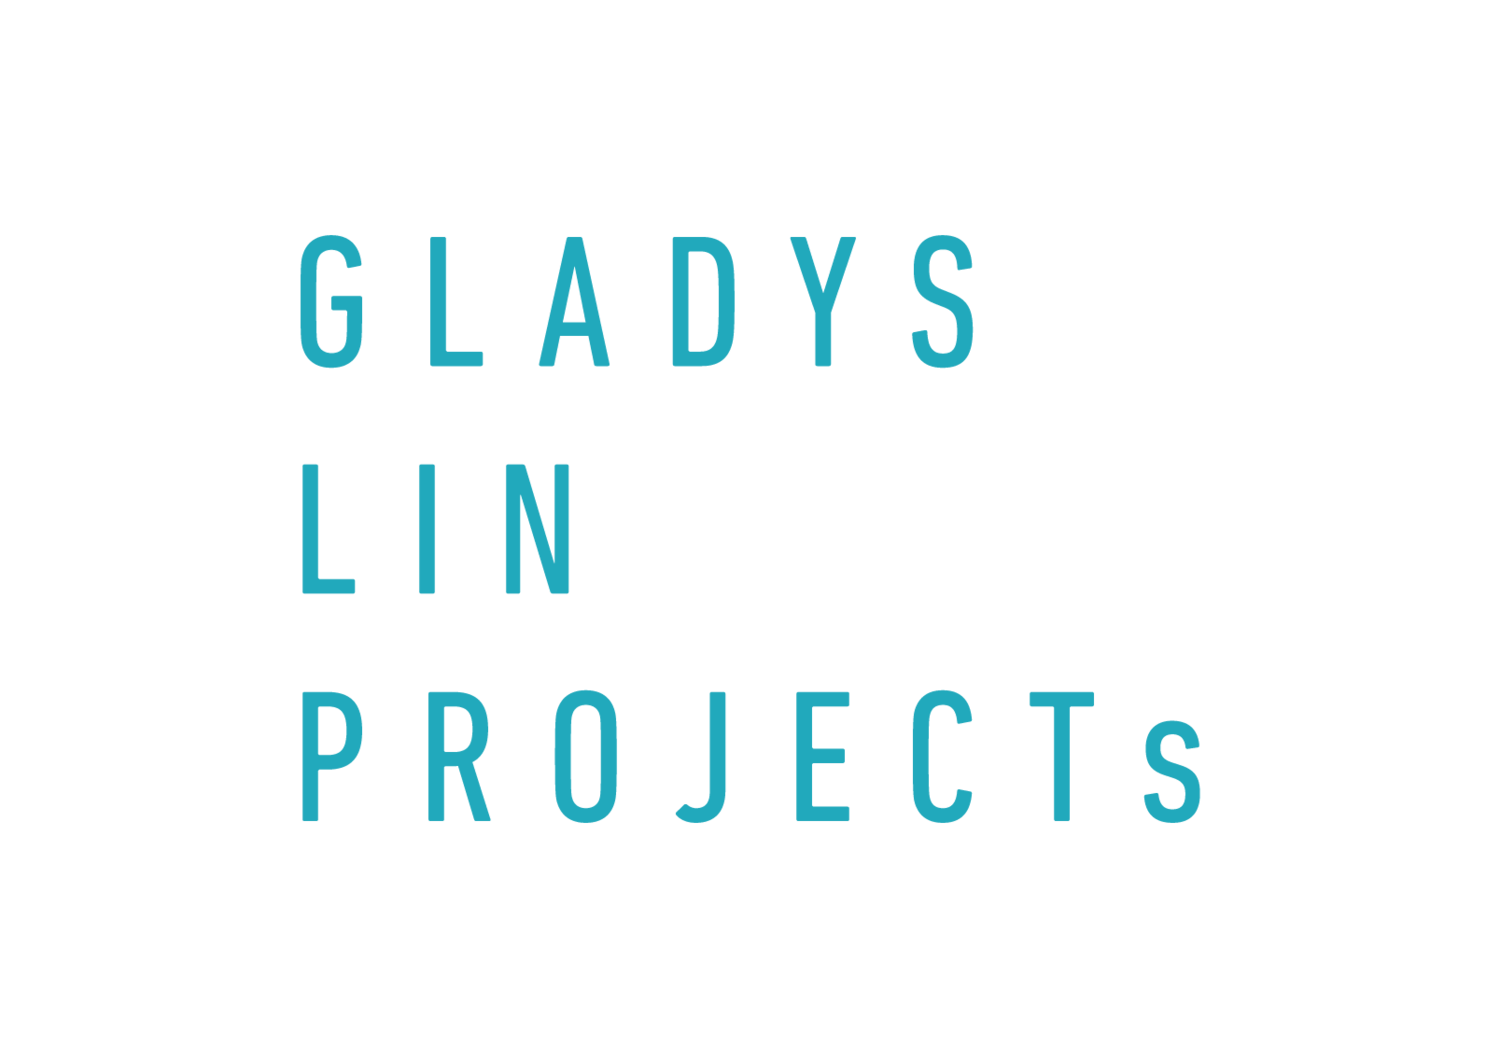 GLADYS LIN PROJECTs